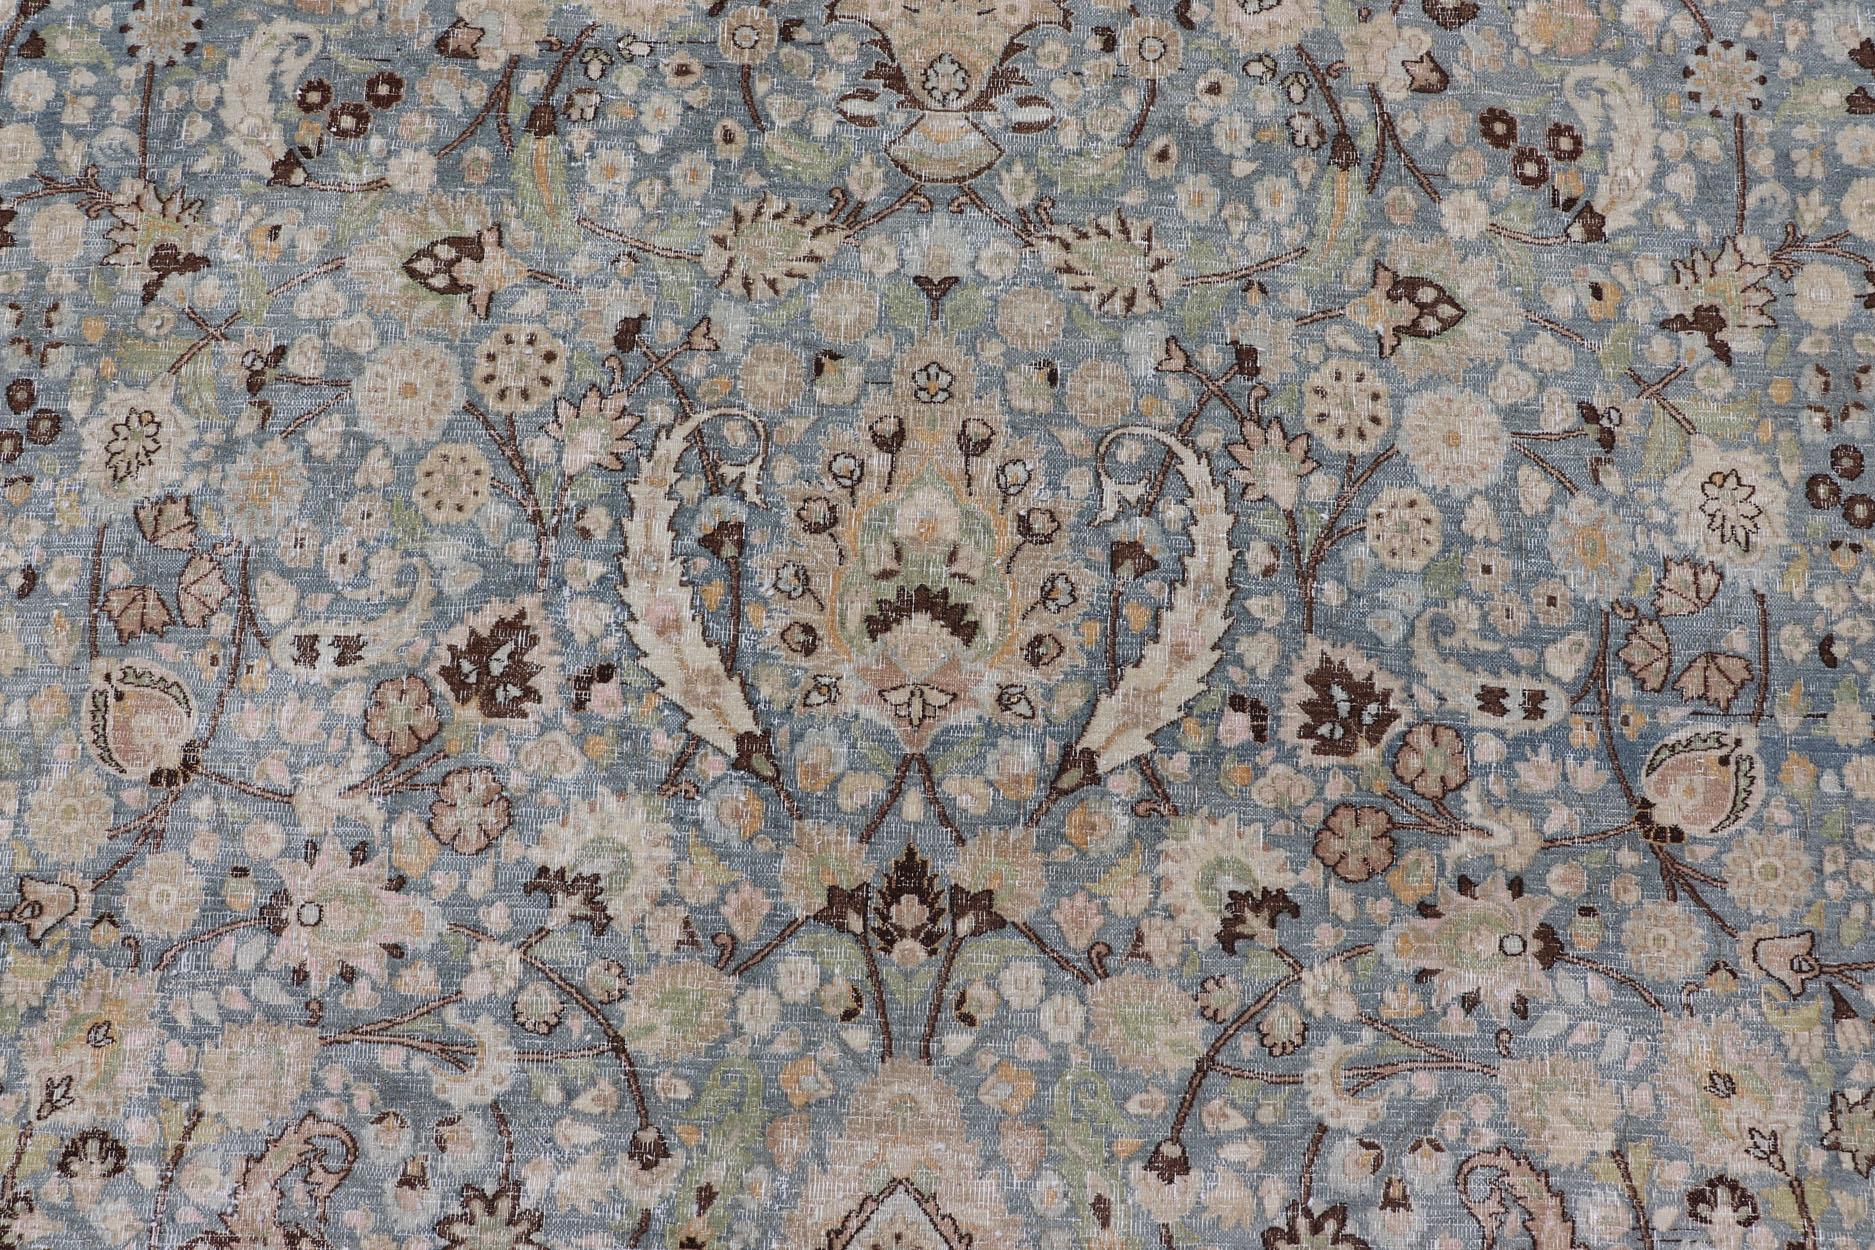 This spectacular antique Persian Khorasan carpet from early 20th century Iran bears a magnificent splendor indicative of royal tastes, which sought perfection in balance and palette. The all-over design displays various sweeping florals and